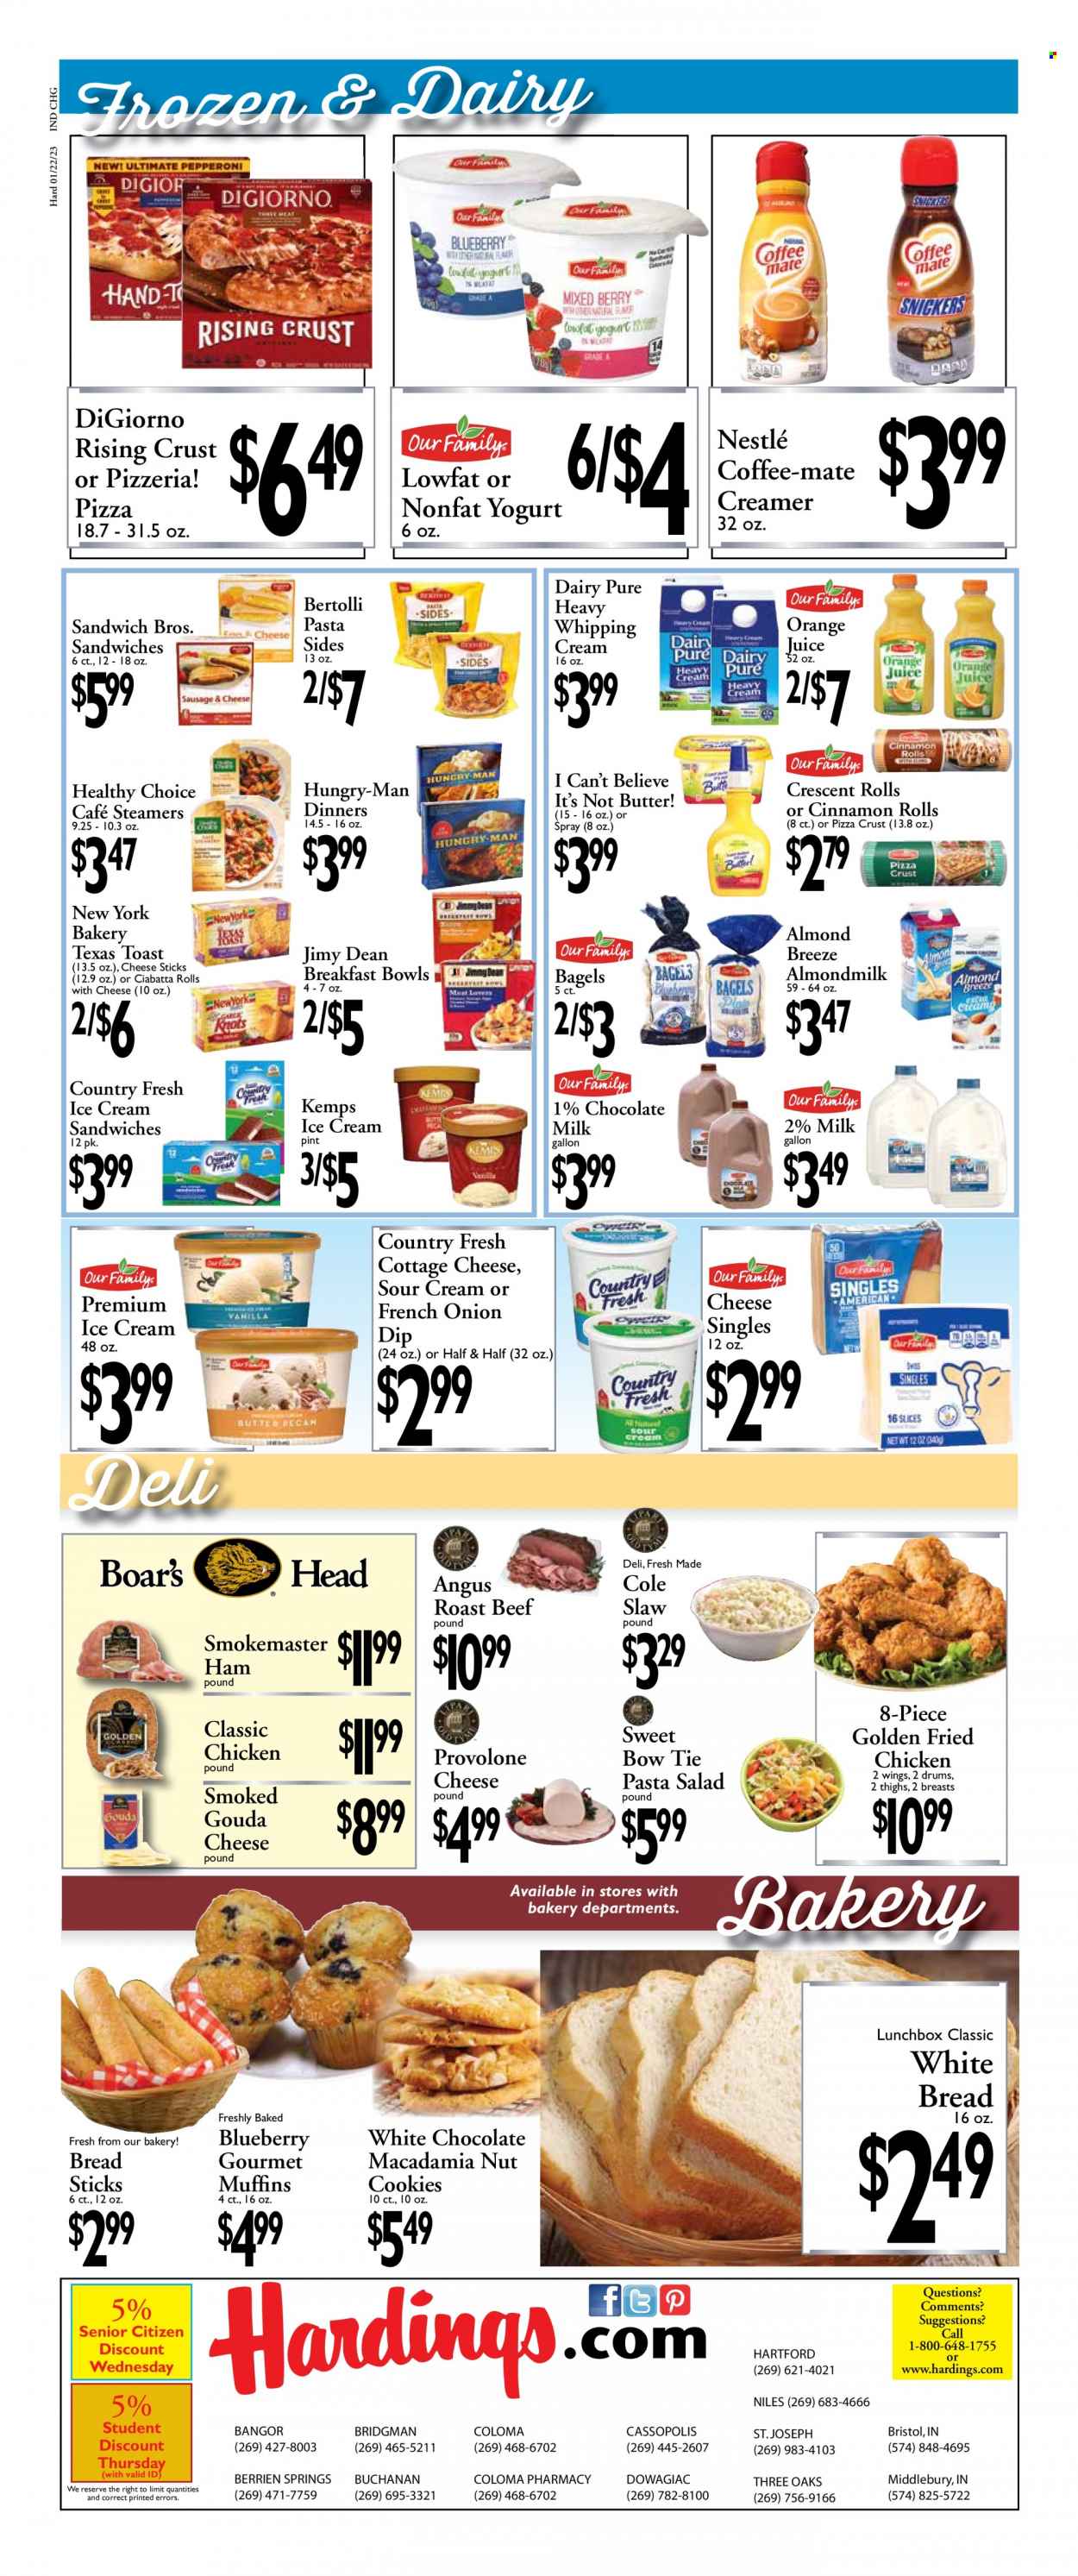 thumbnail - Harding's Markets Flyer - 01/22/2023 - 02/04/2023 - Sales products - bagels, ciabatta, white bread, cinnamon roll, crescent rolls, muffin, salad, pizza, fried chicken, breakfast bowl, Healthy Choice, pasta sides, Bertolli, ham, pasta salad, cottage cheese, gouda, Provolone, Kemps, yoghurt, almond milk, Coffee-Mate, milk, Almond Breeze, I Can't Believe It's Not Butter, sour cream, creamer, whipping cream, dip, ice cream, ice cream sandwich, cheese sticks, cookies, milk chocolate, Nestlé, white chocolate, bread sticks, orange juice, juice, beef meat, roast beef, Half and half. Page 6.